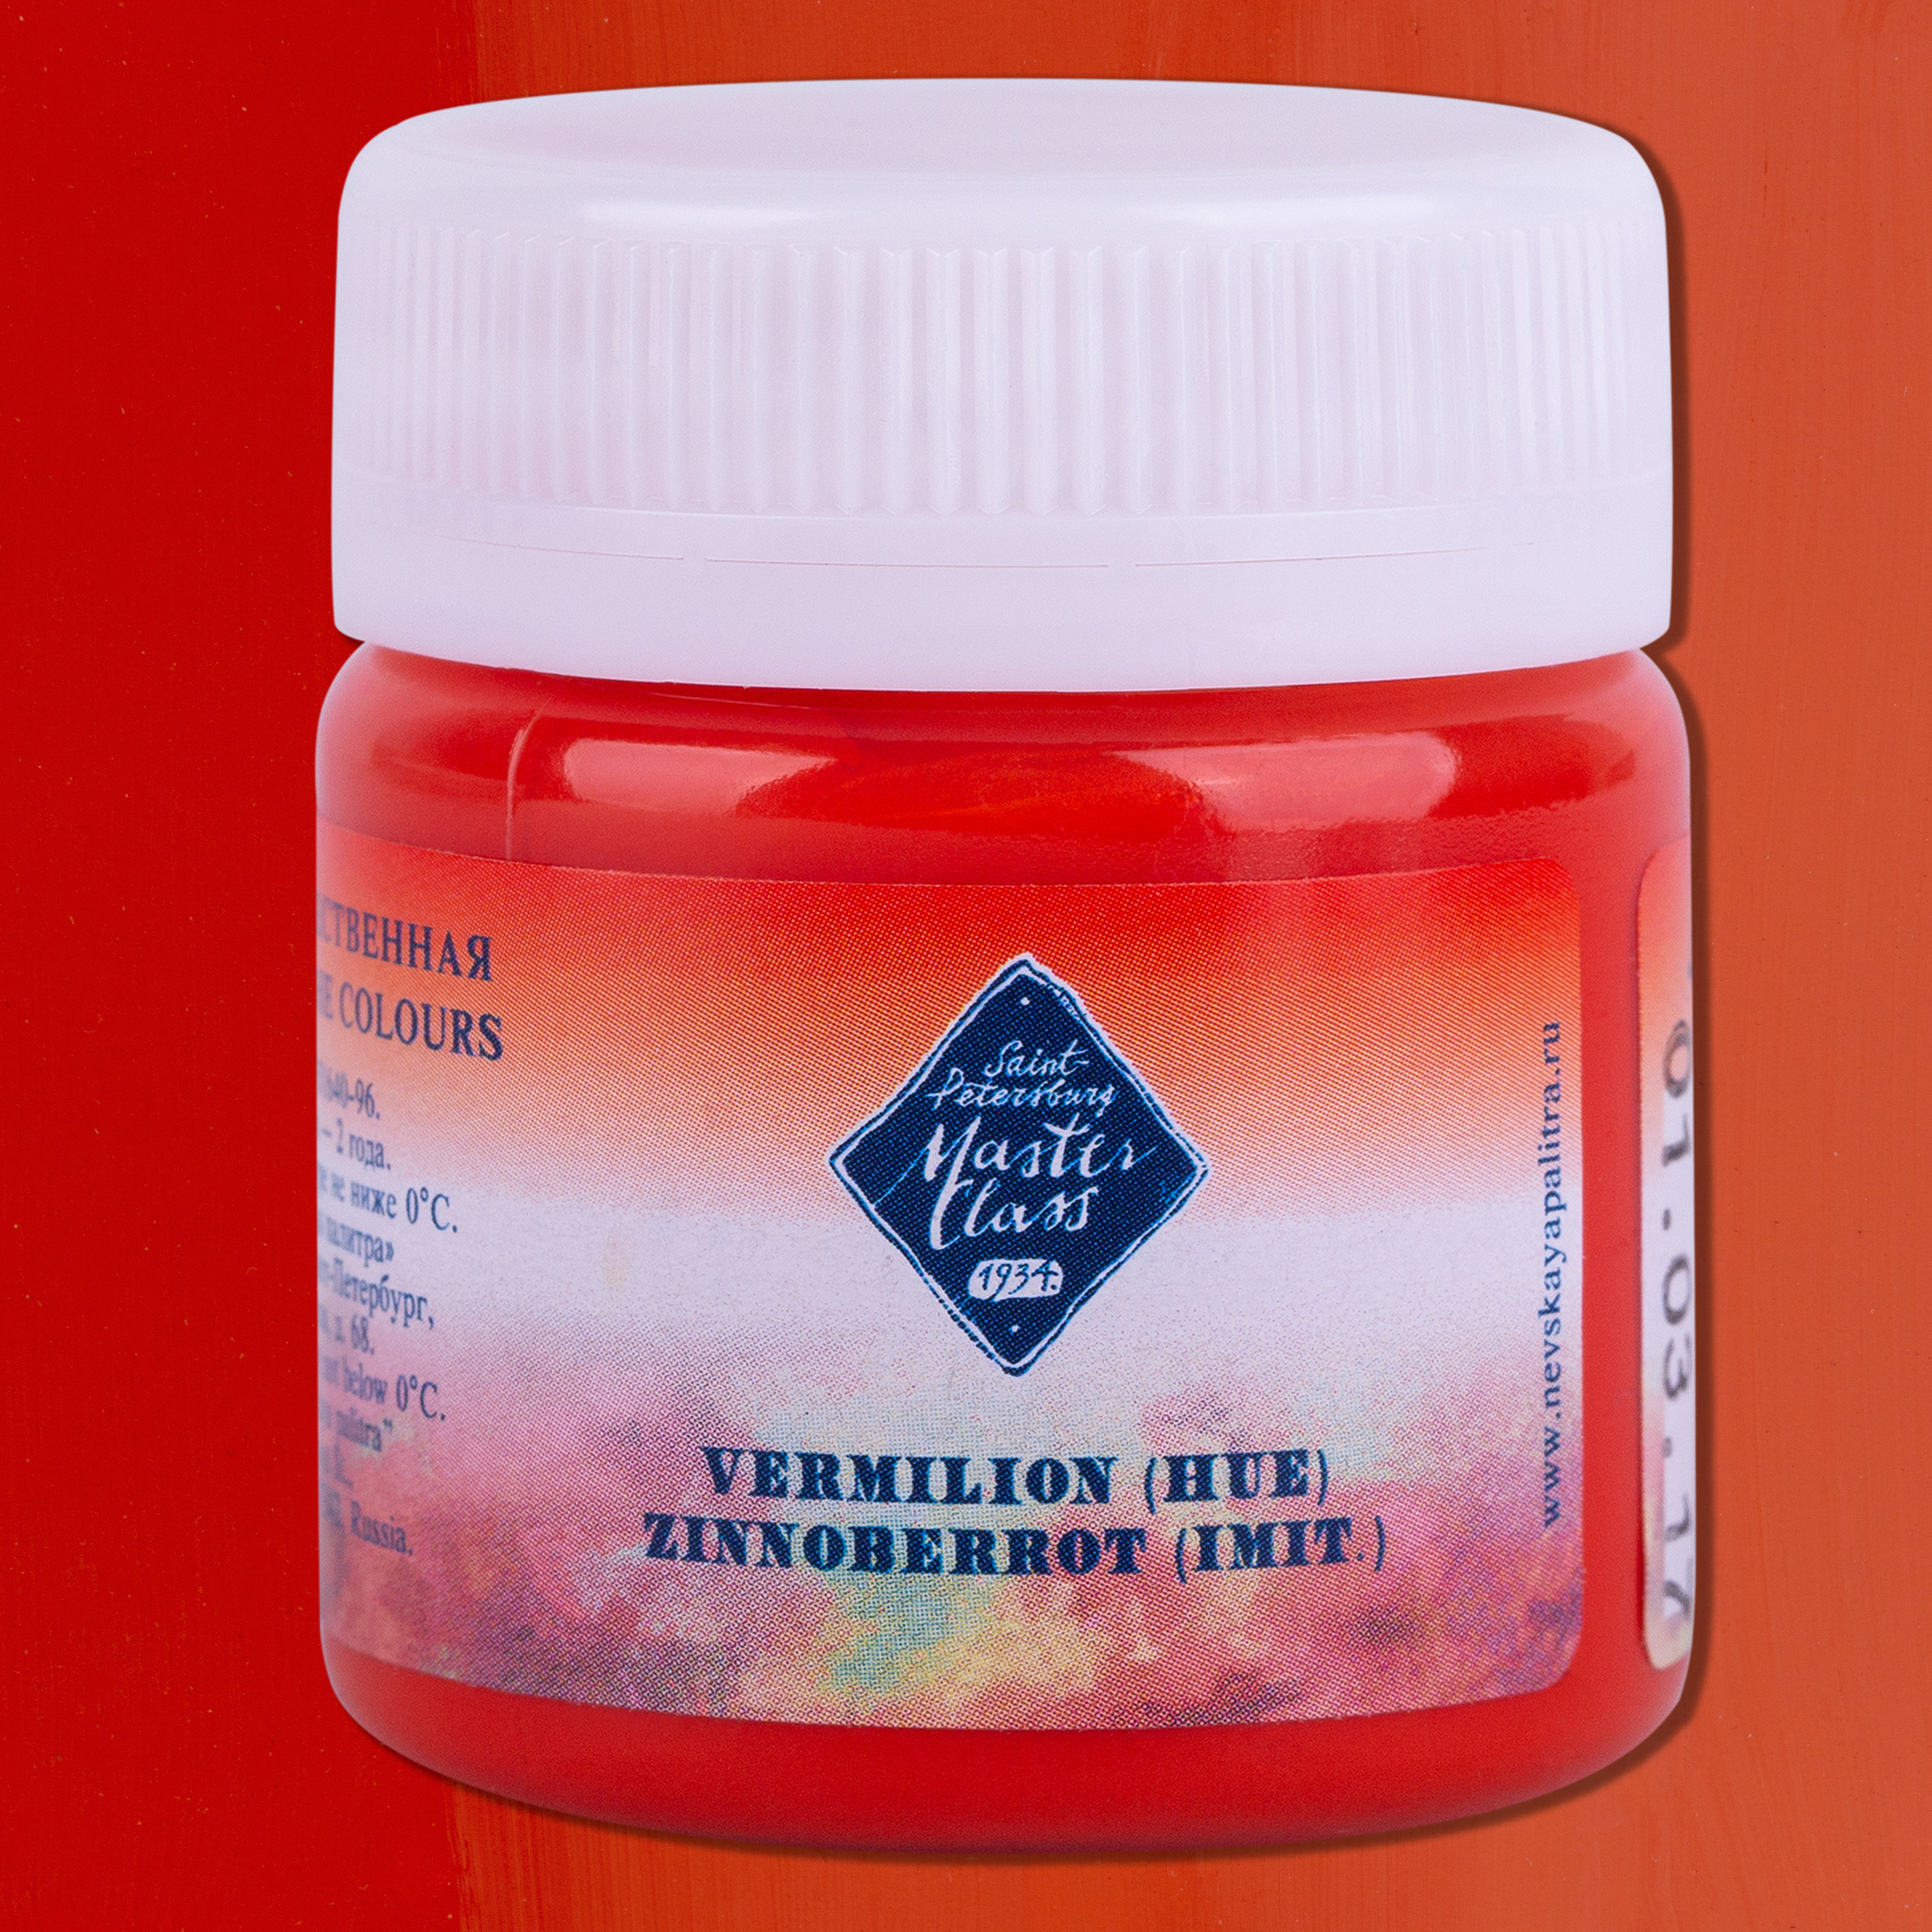 Vermilion (HUE) "Master Class" in the jar. № 312